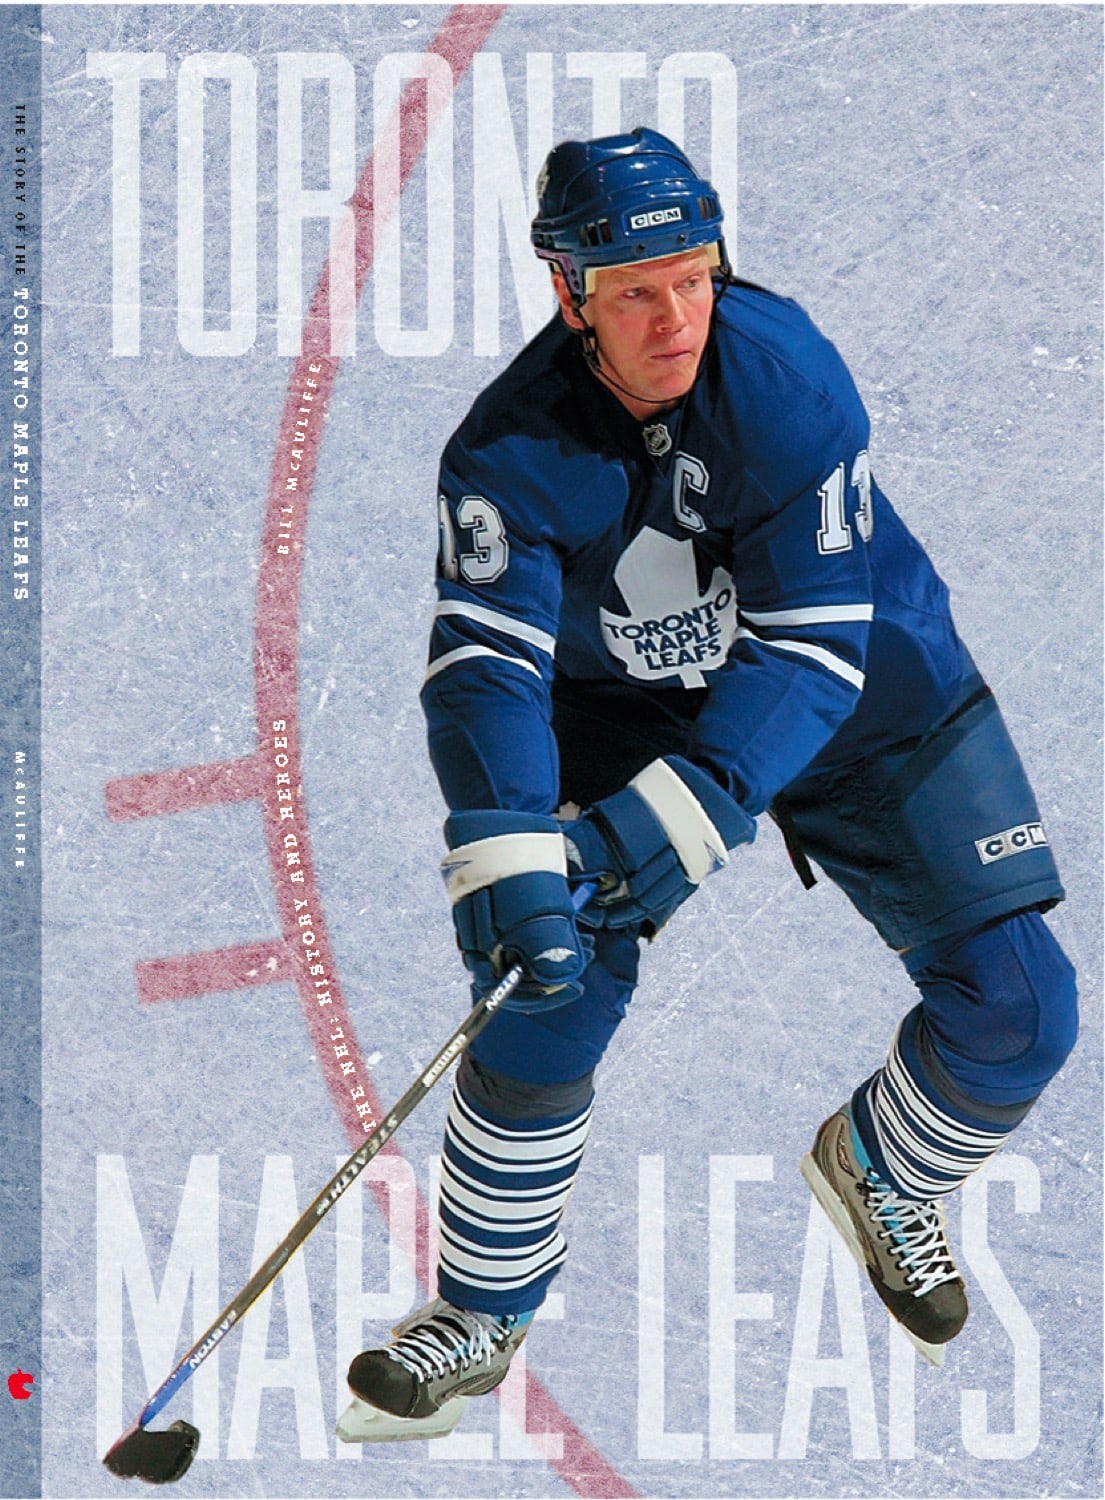 The NHL: History and Heroes: The Story of the Toronto Maple Leafs